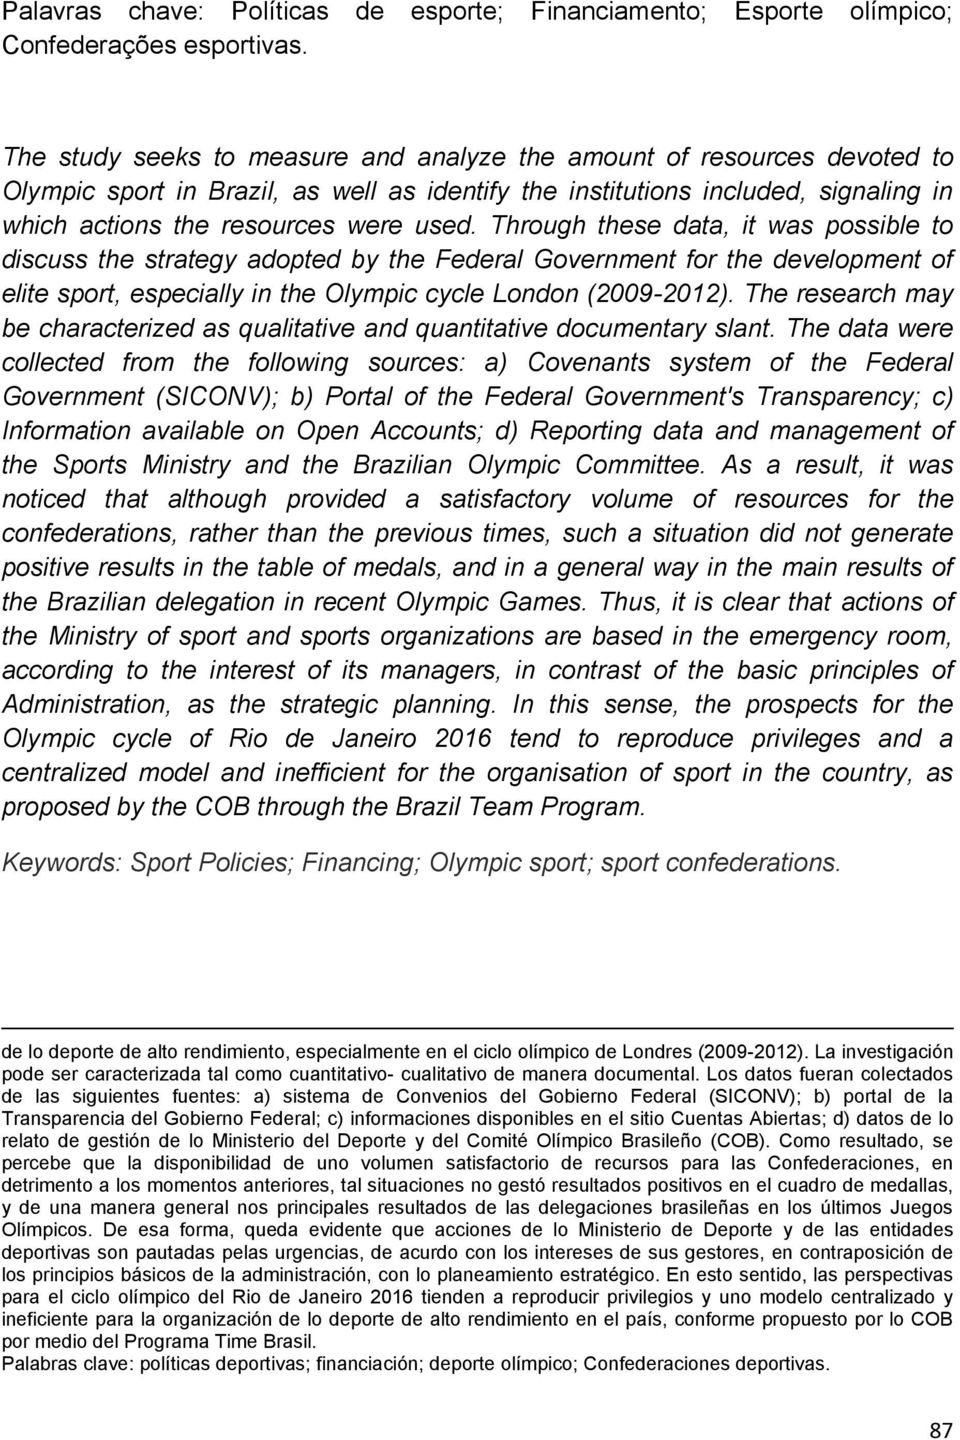 Through these data, it was possible to discuss the strategy adopted by the Federal Government for the development of elite sport, especially in the Olympic cycle London (2009-2012).